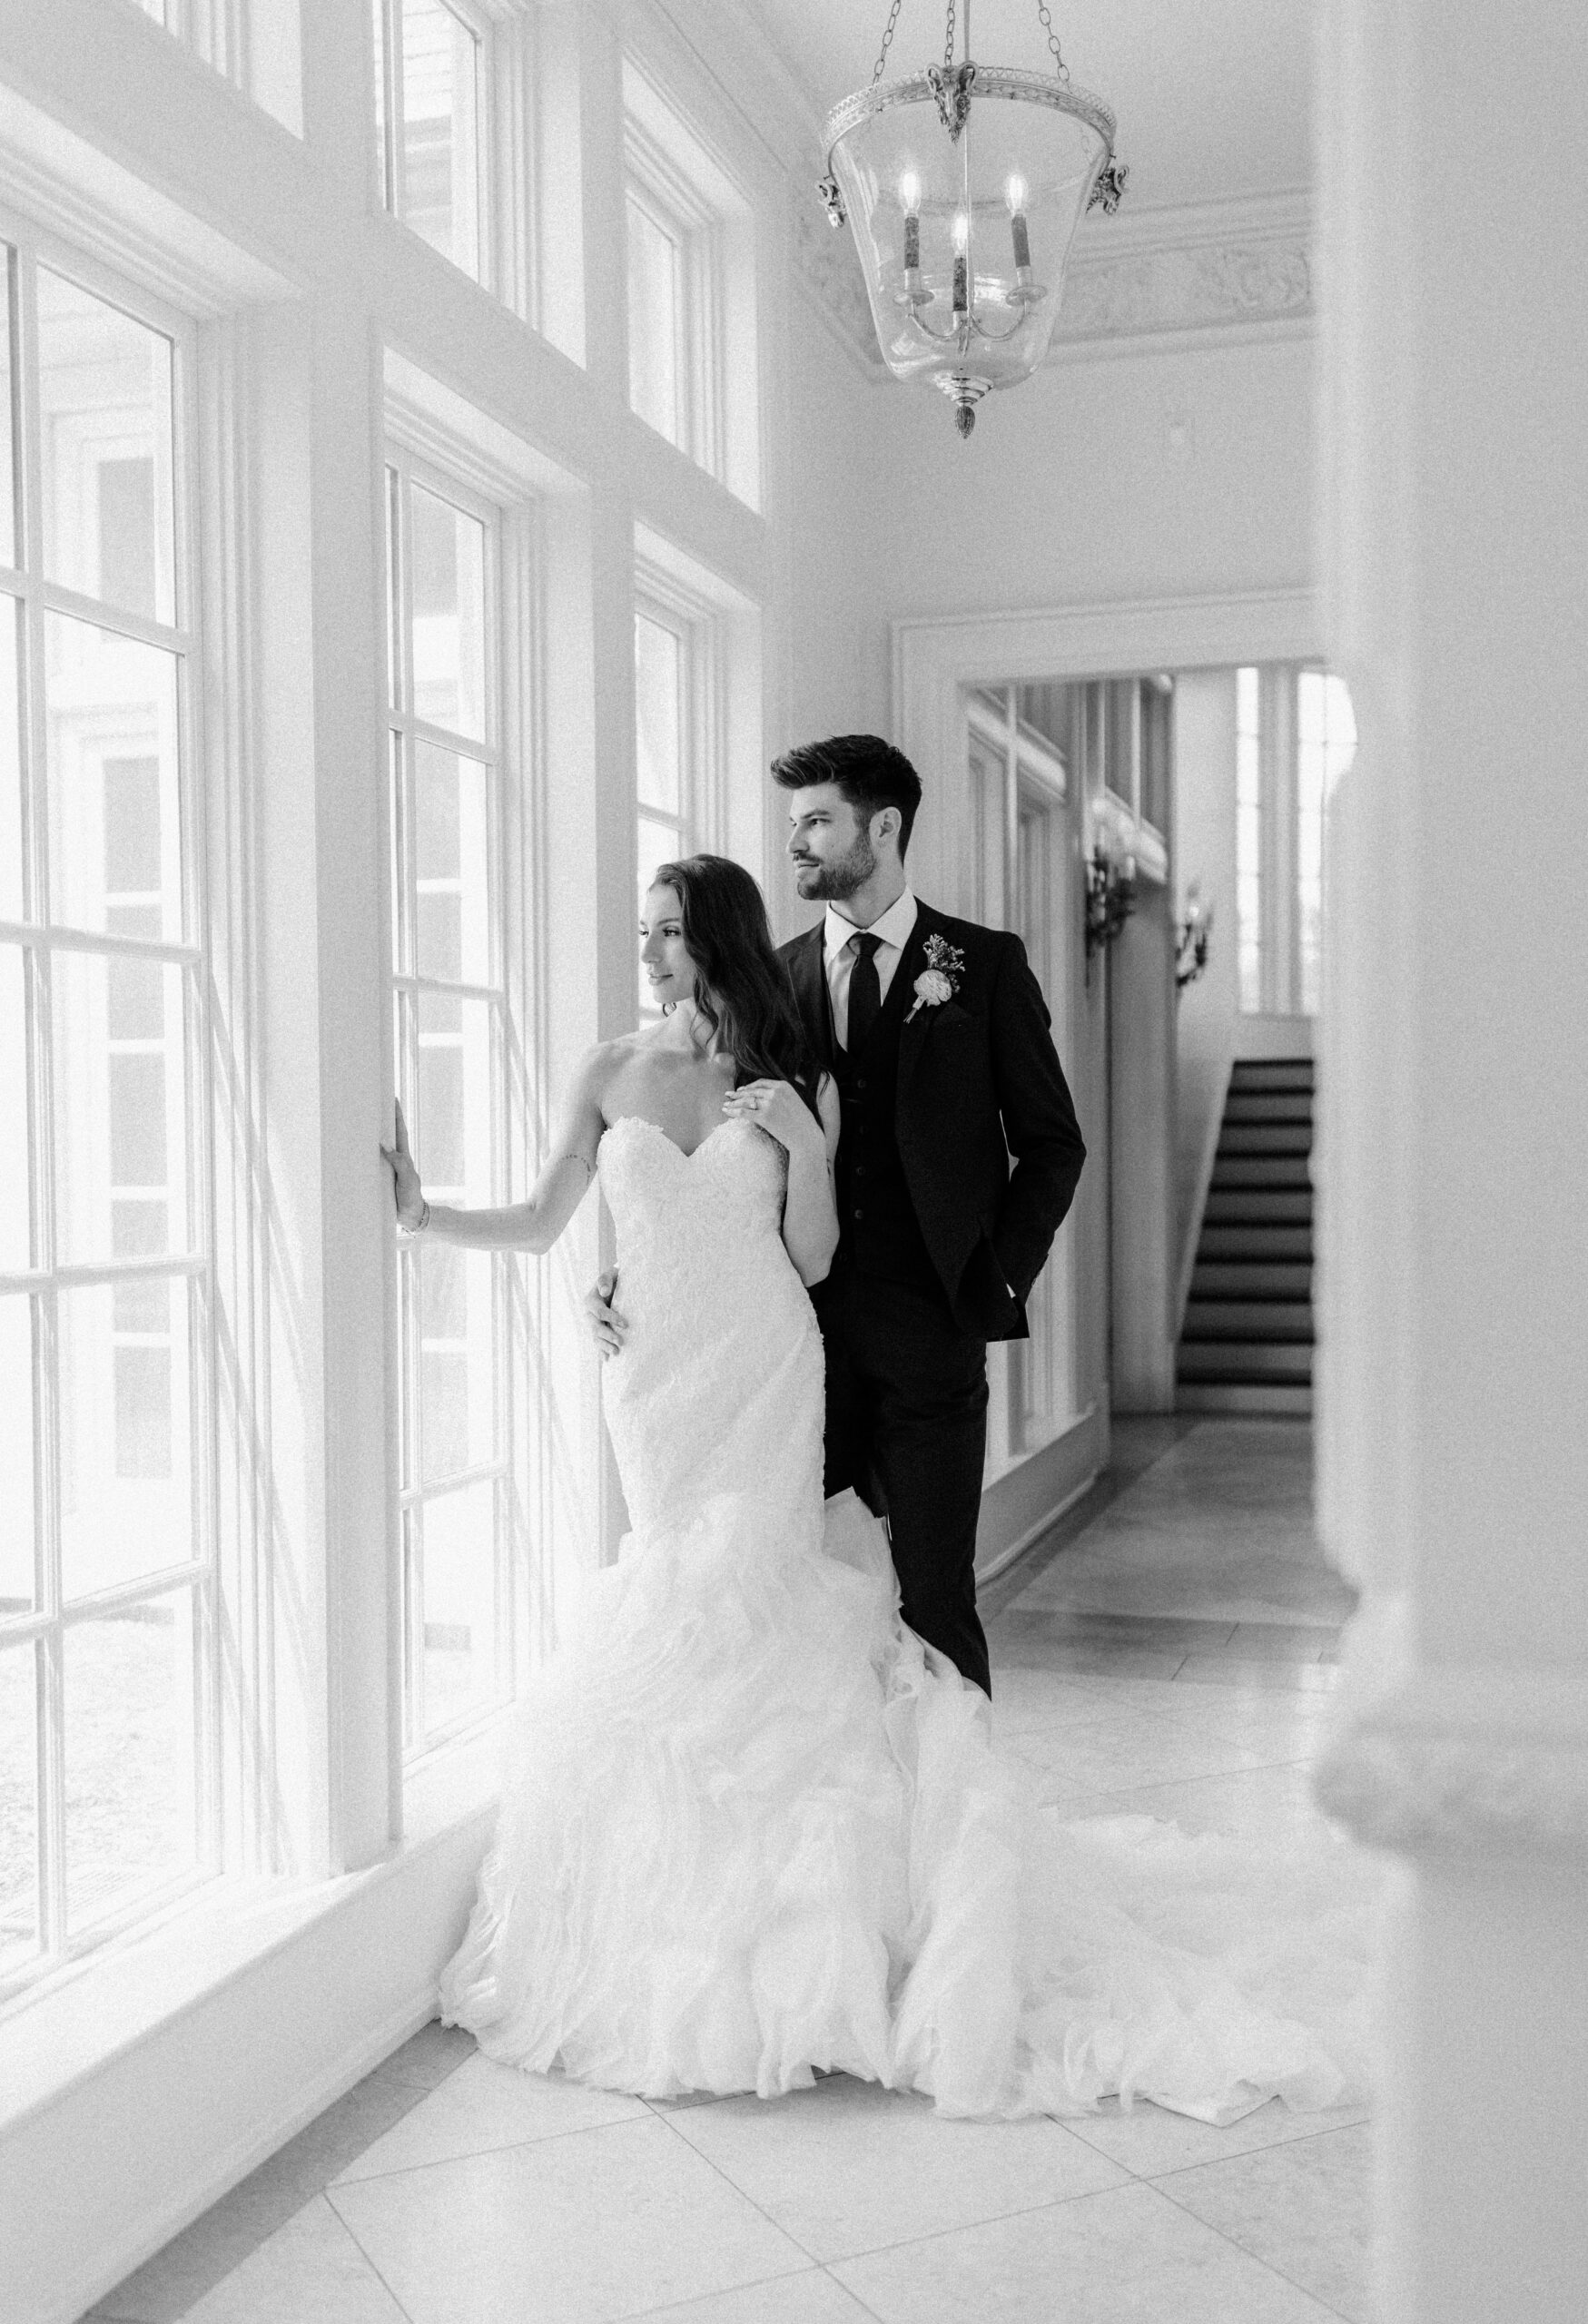 Black and white Portrait of a bride and groom wedding photography, wedding photos